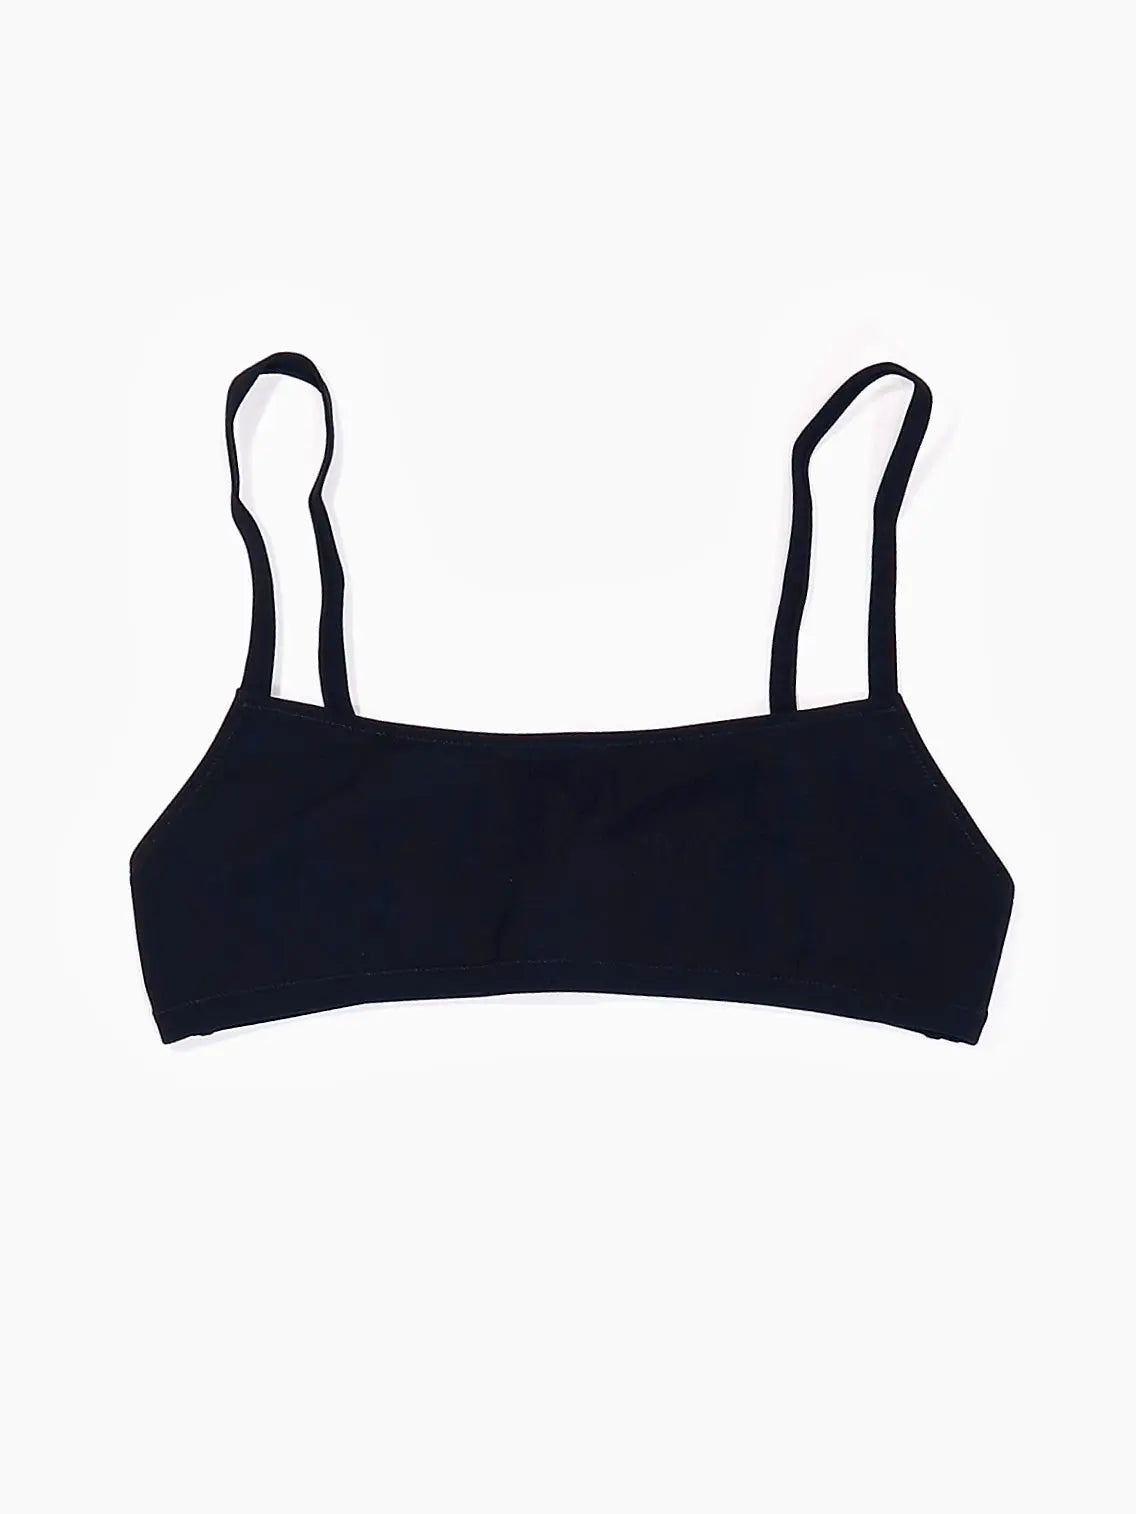 A simple black Undici Bikini Top Black by Lido on a plain white background. The bikini top, available at Bassalstore in Barcelona, features a minimalistic design with two thin shoulder straps and a straight neckline.